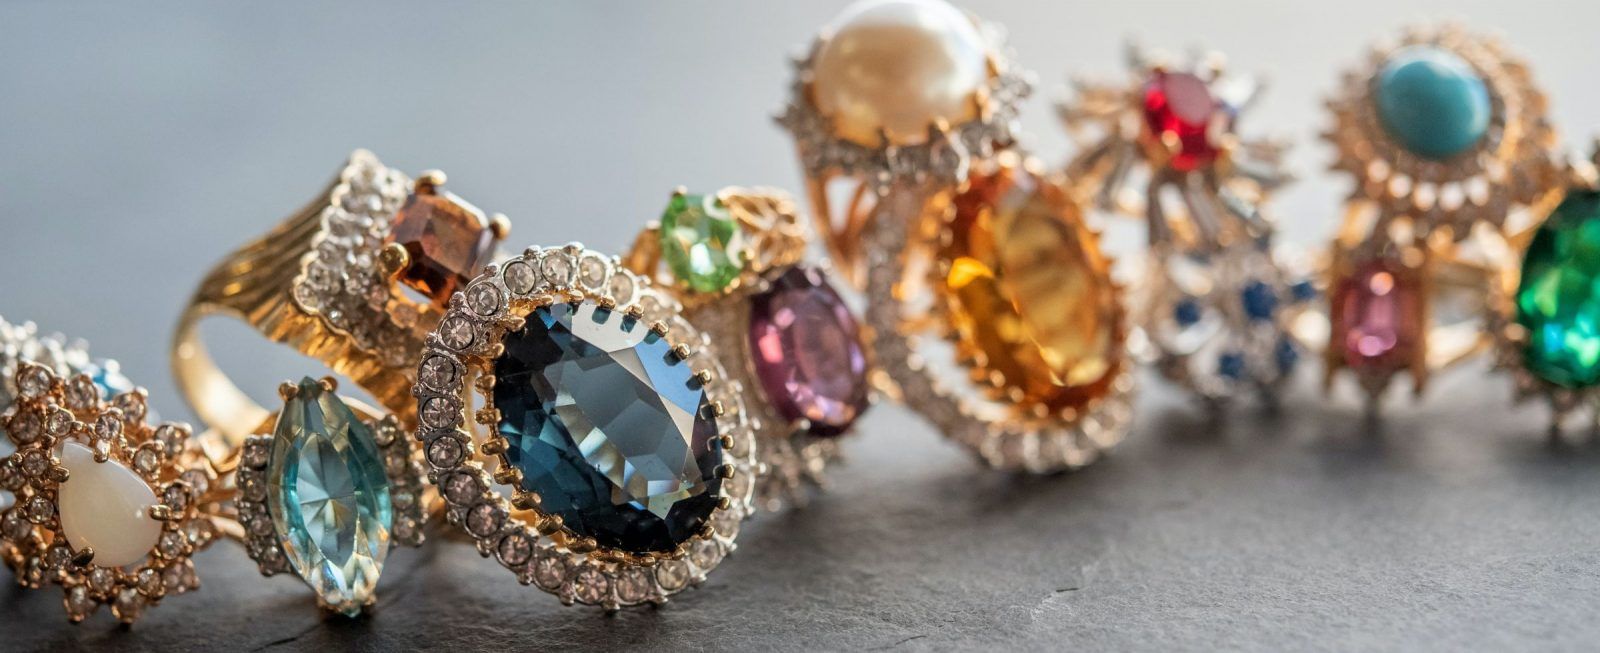 Dazzling jewellery to Buy According to Your Birthstone